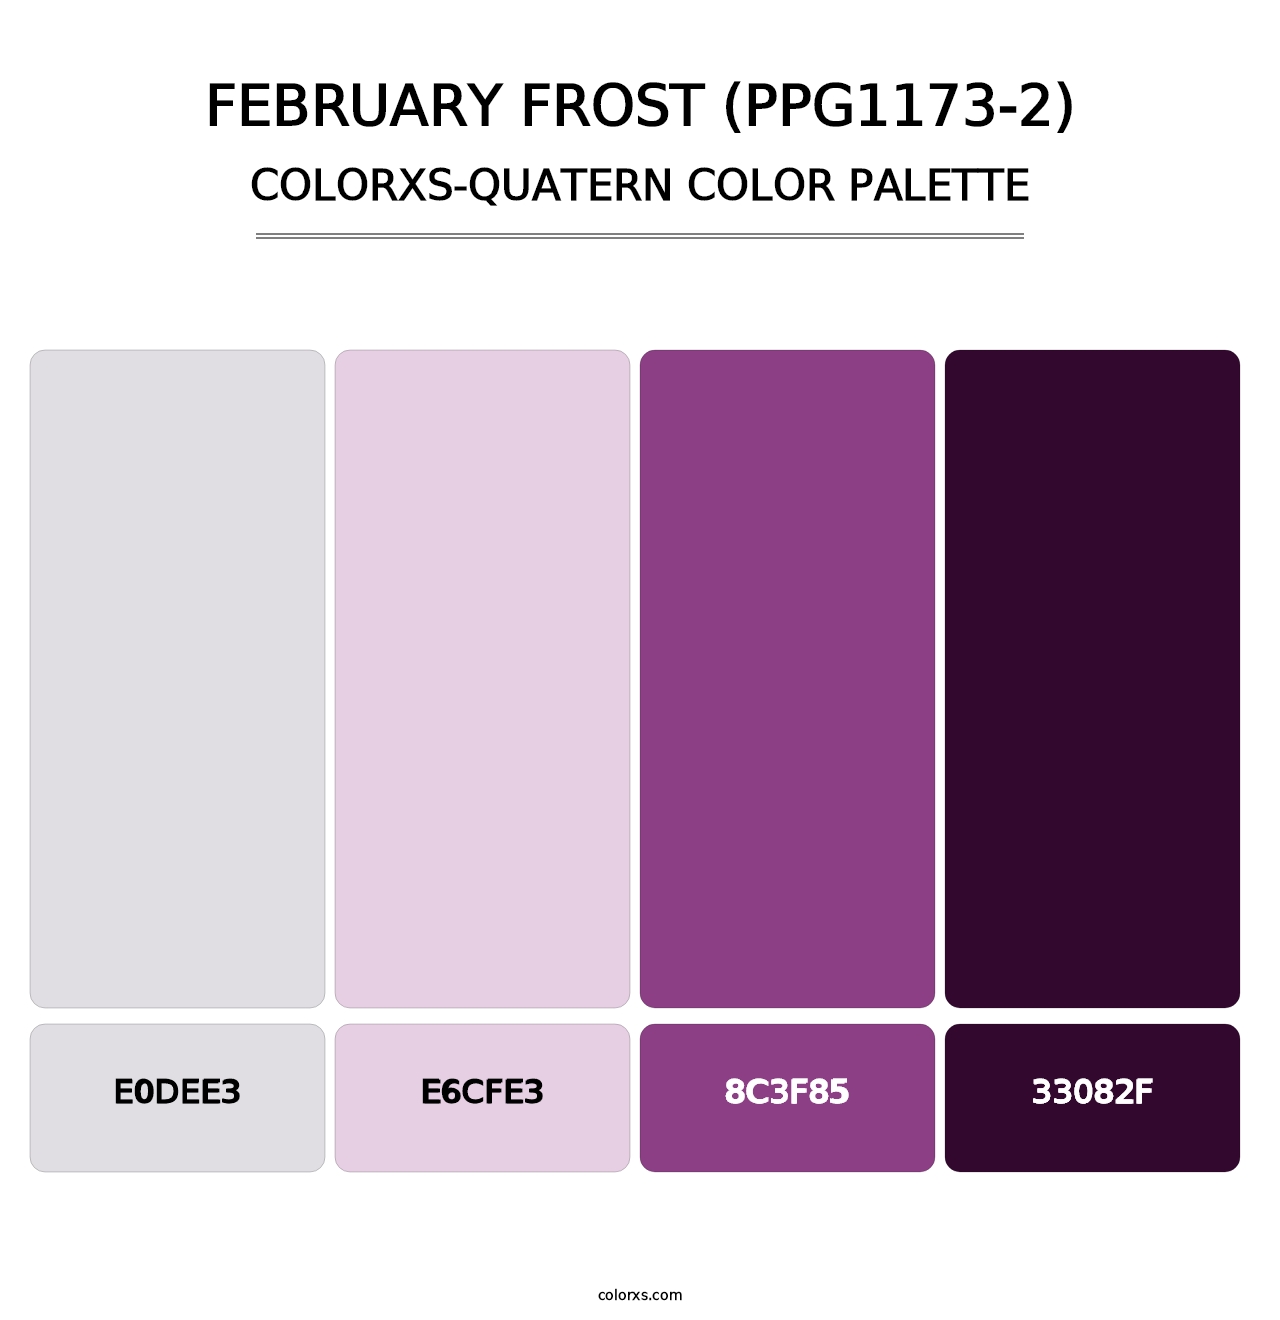 February Frost (PPG1173-2) - Colorxs Quatern Palette